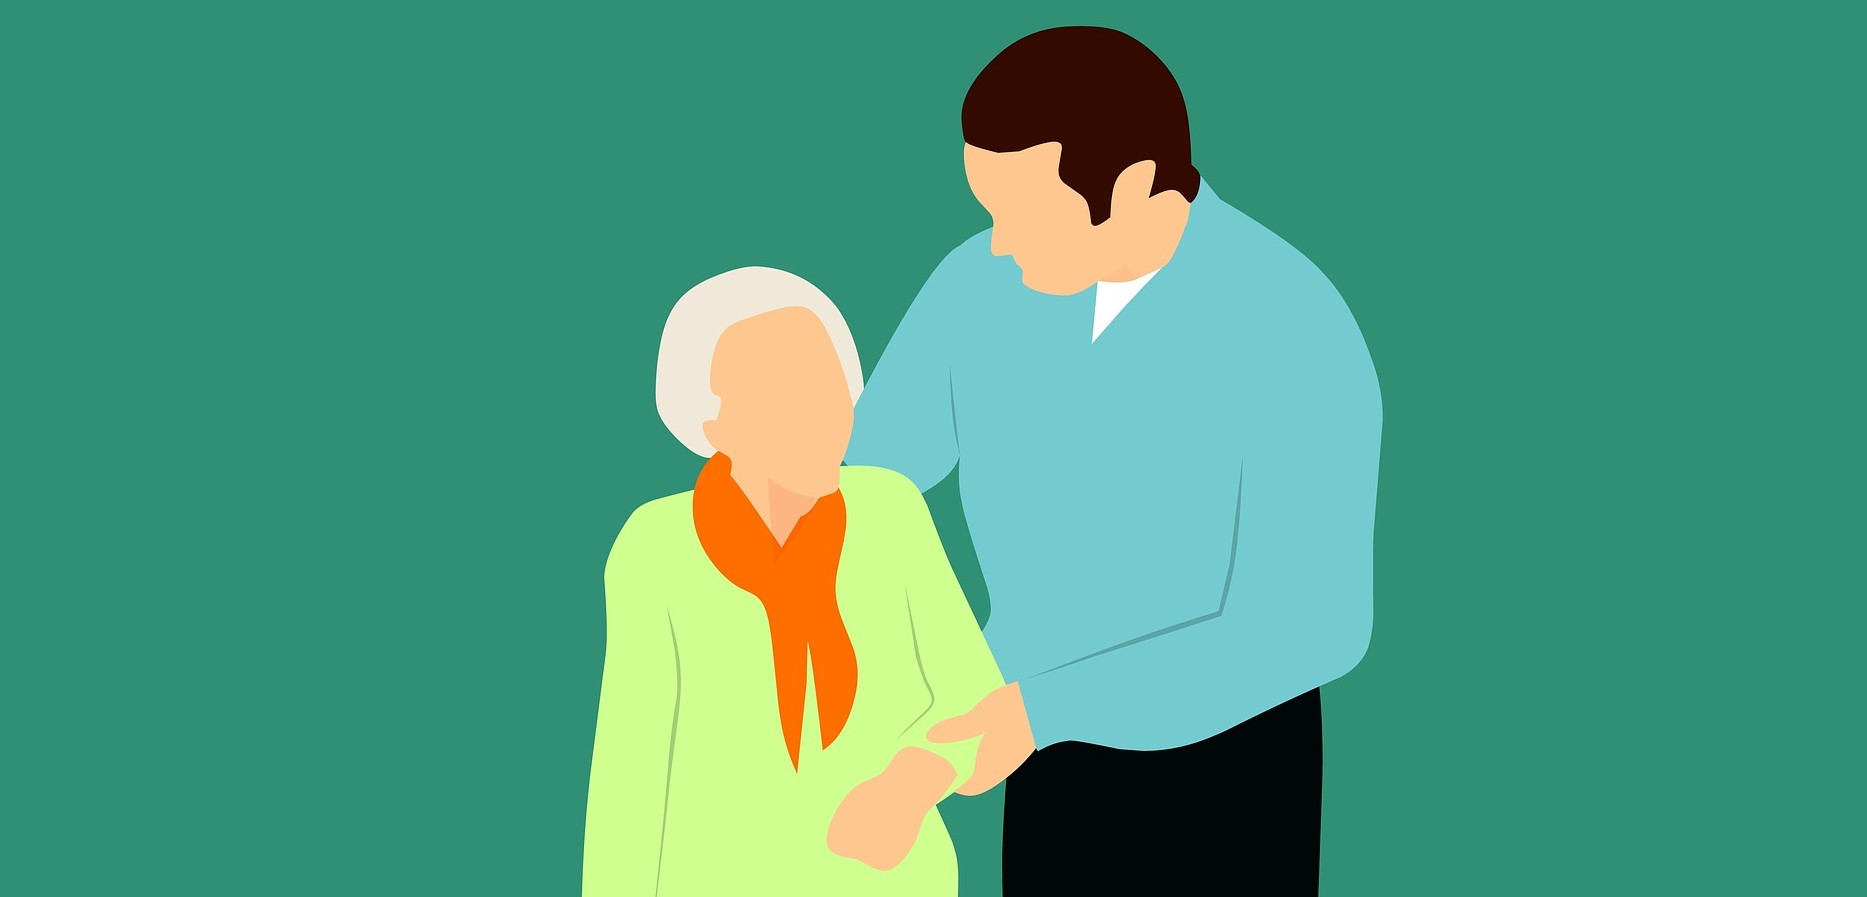 Stages of dementia: Tips for care partners